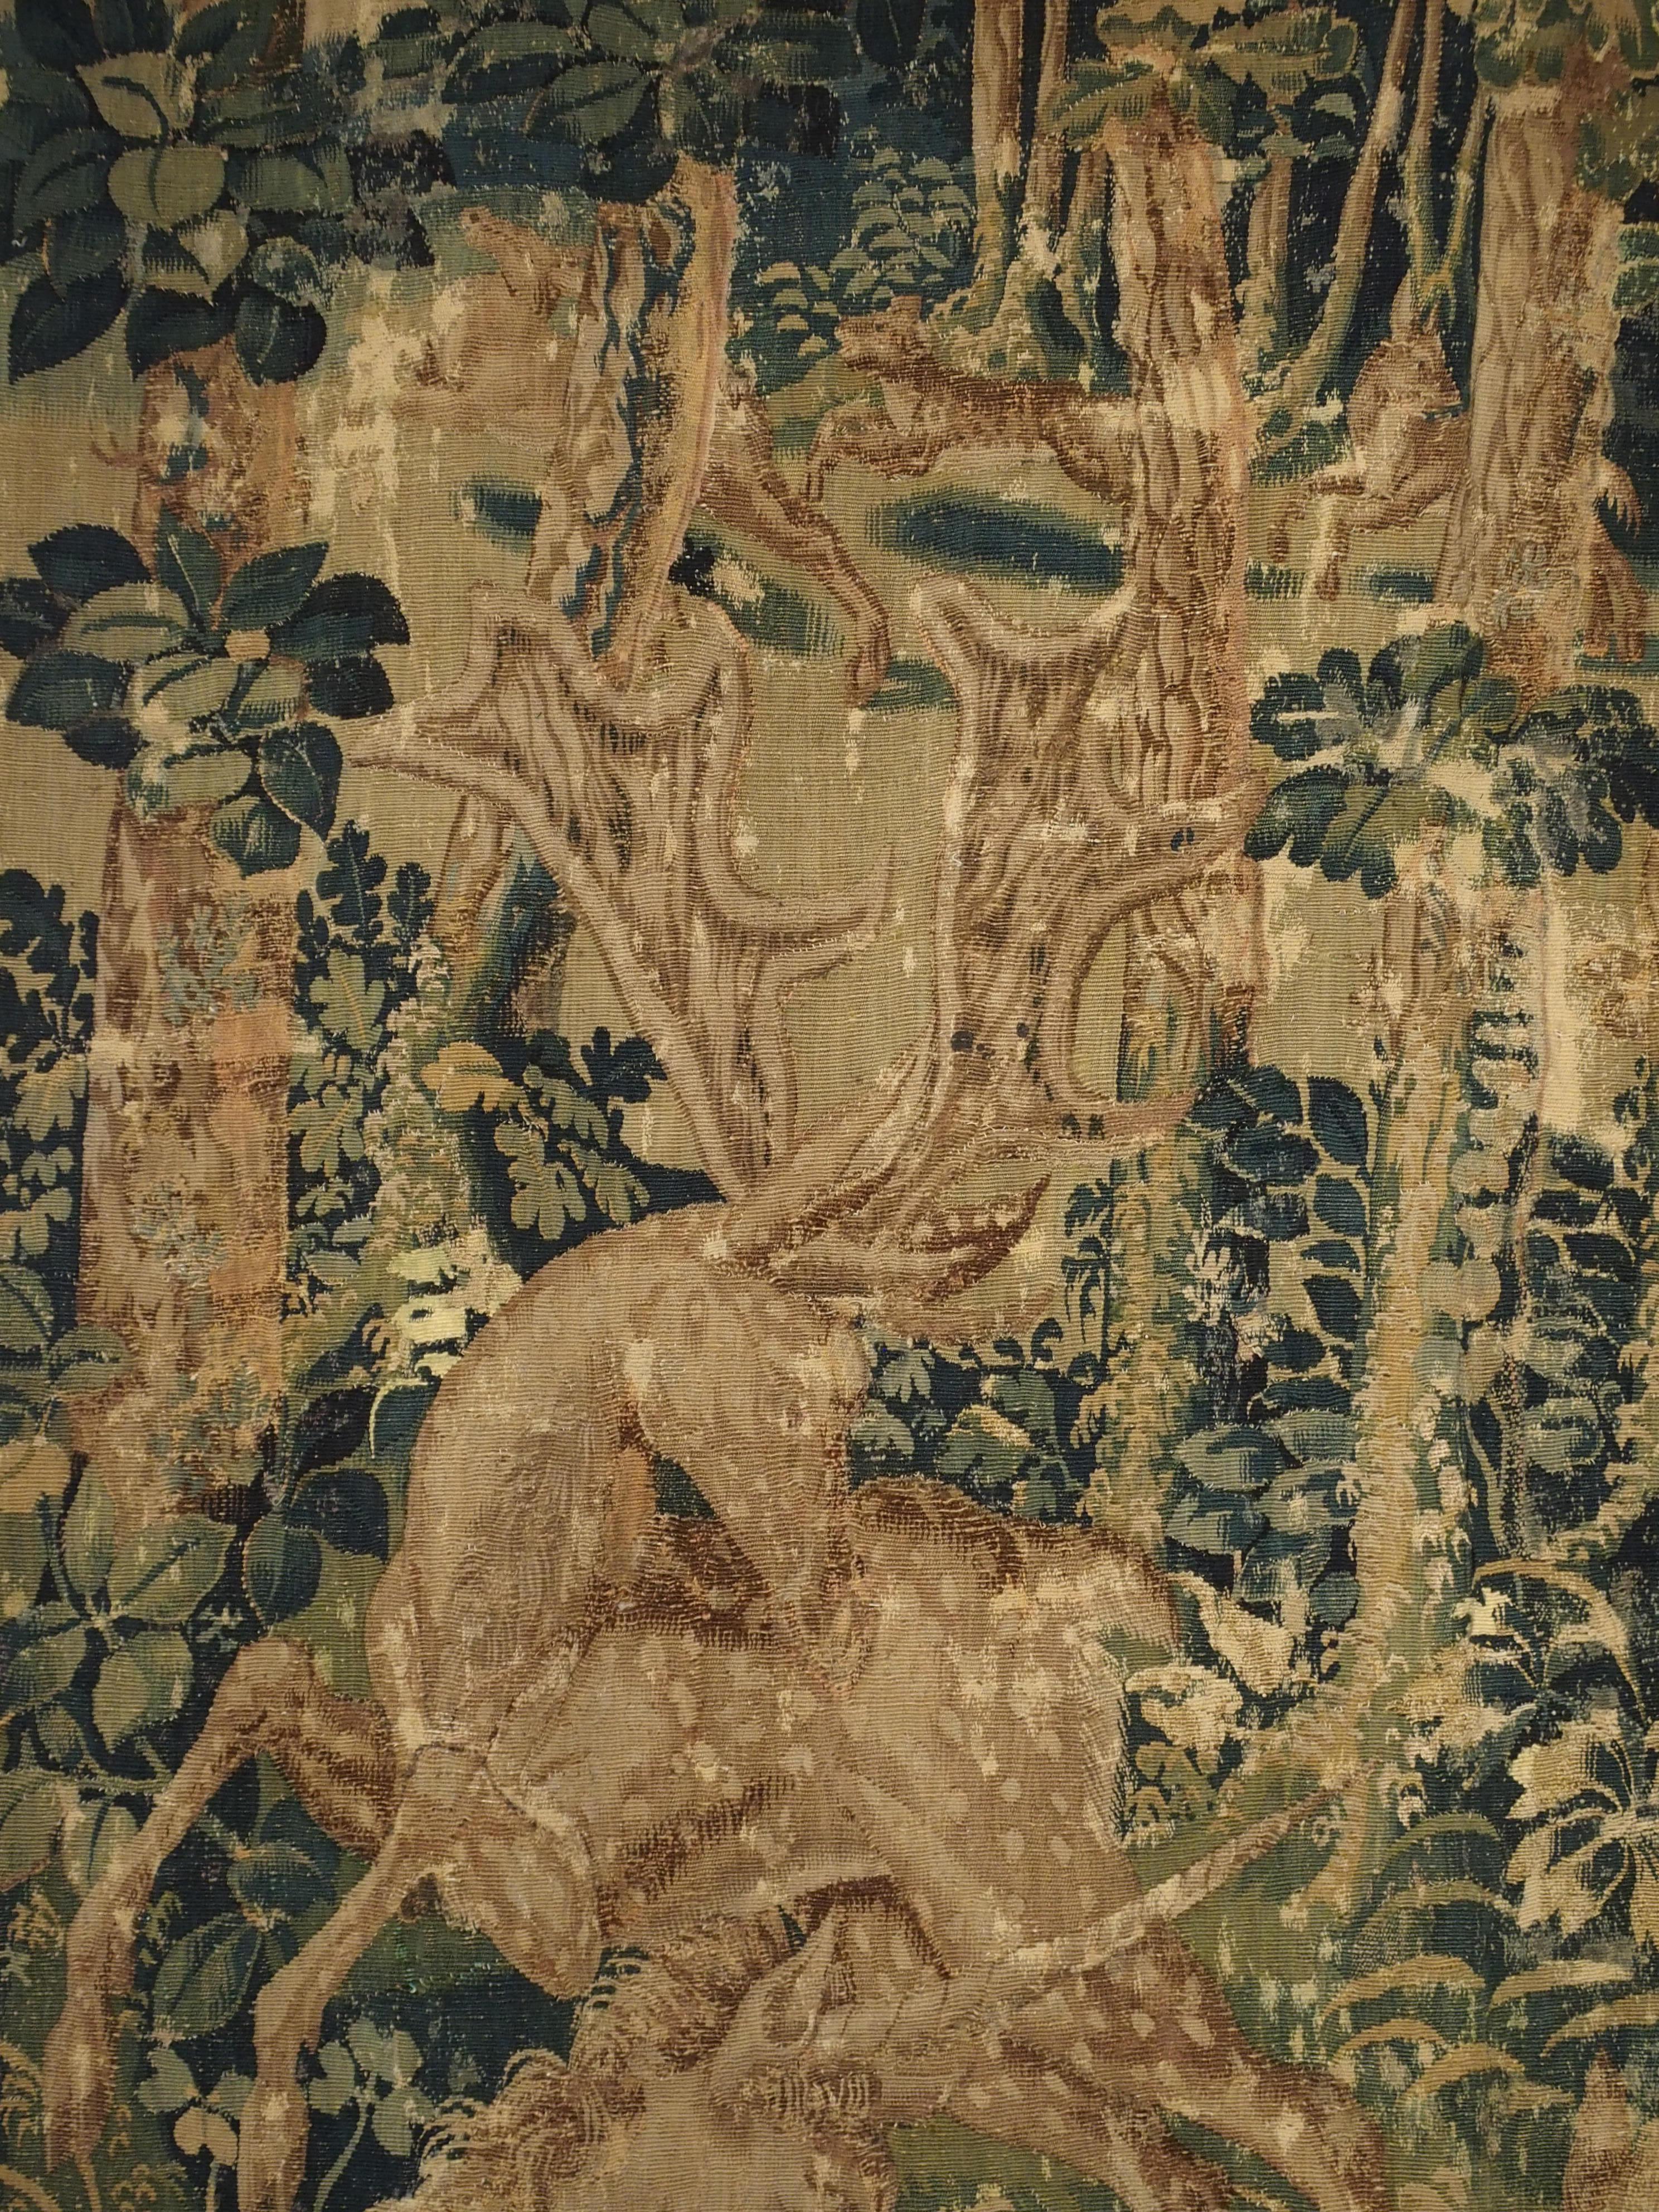 Late 16th Century Flemish Game Park Tapestry with Unicorn, Stag, and Boar 3